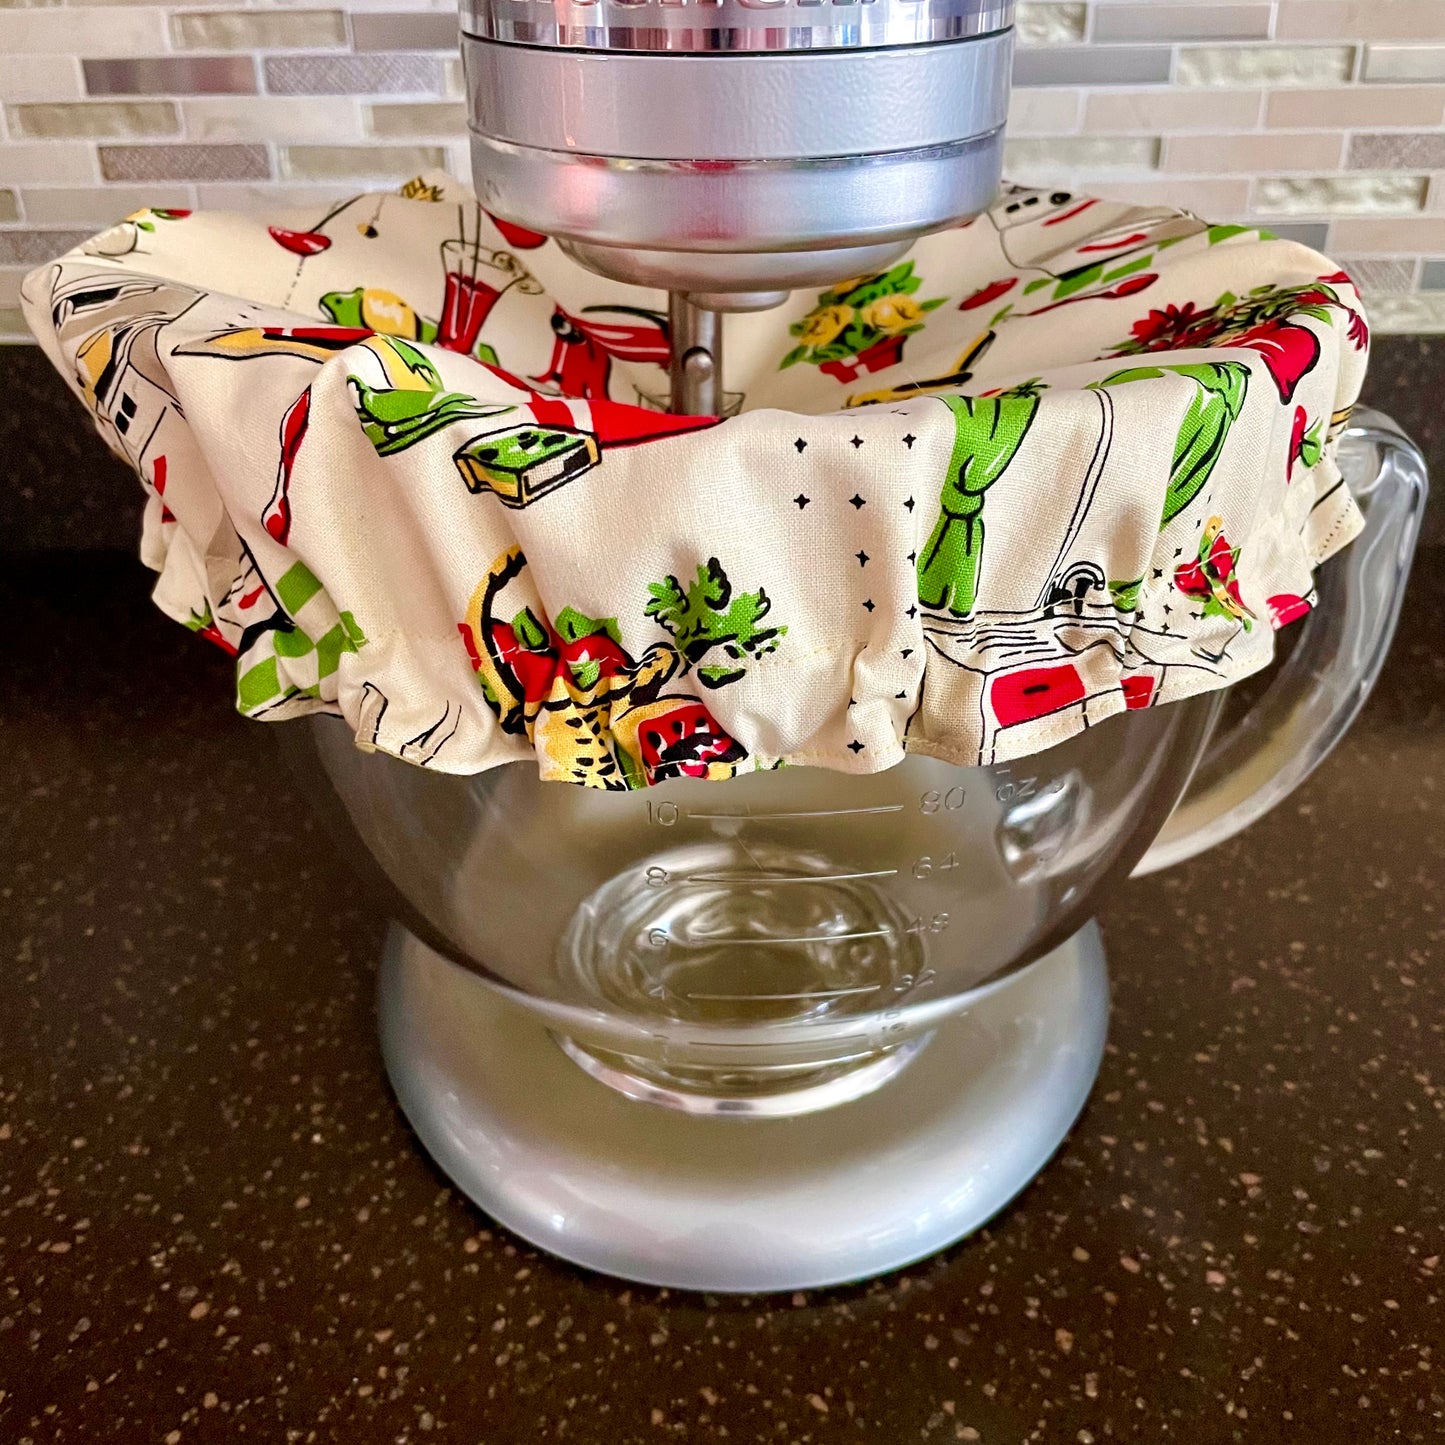 Stand Mixer Bowl Covers - Retro Fifties Kitchen